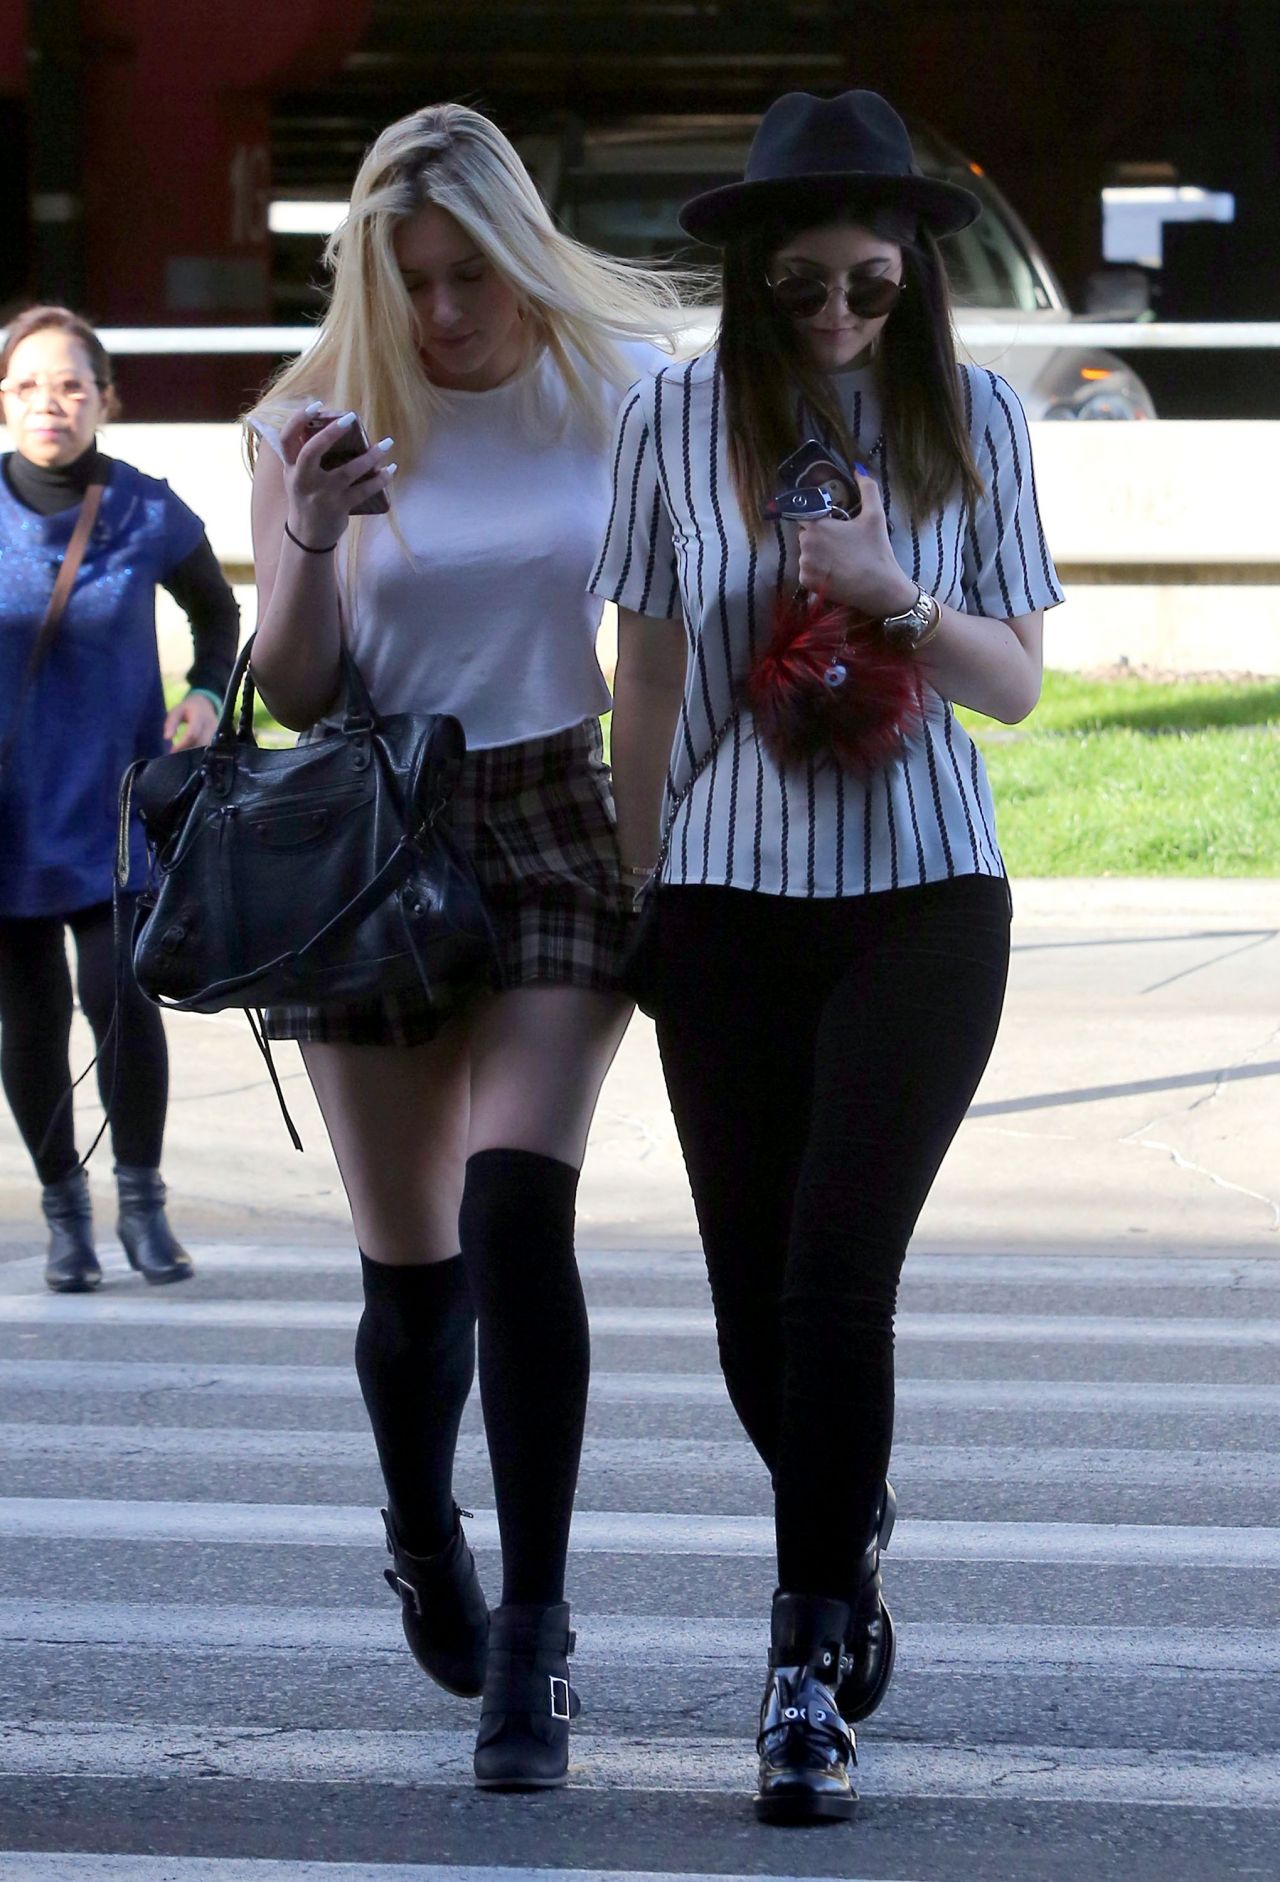 Kylie Jenner LAX Airport August 27, 2014 – Star Style